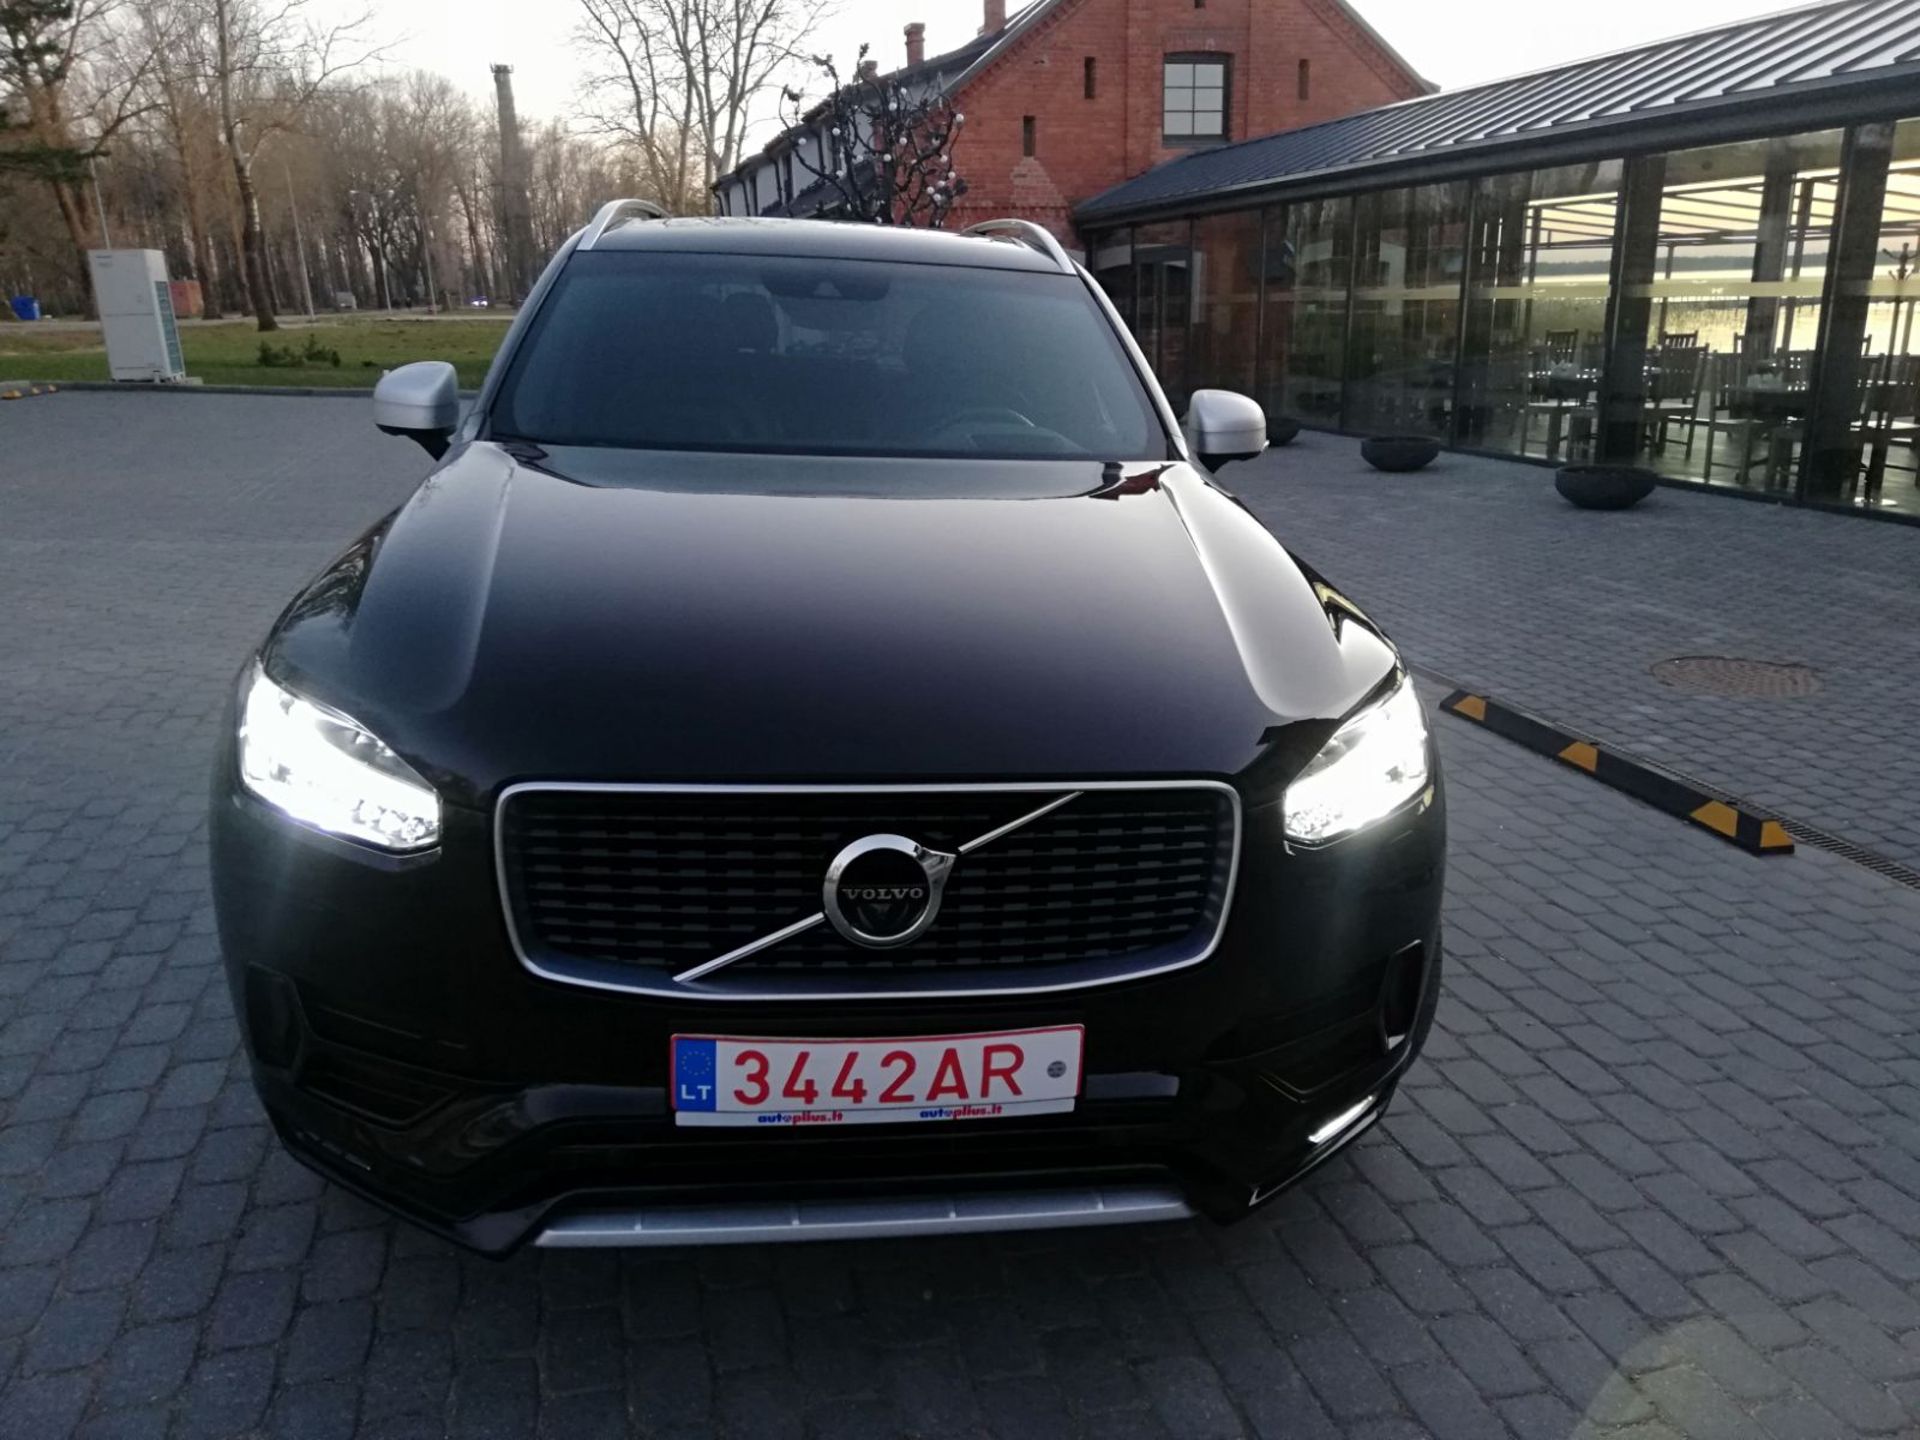 2017 VOLVO XC90 T6 AWD LEFT HAND DRIVE R-DESIGN 2.0L PETROL AUTOMATIC, 45,000 KM, DRIVES LIKE NEW - Image 3 of 43